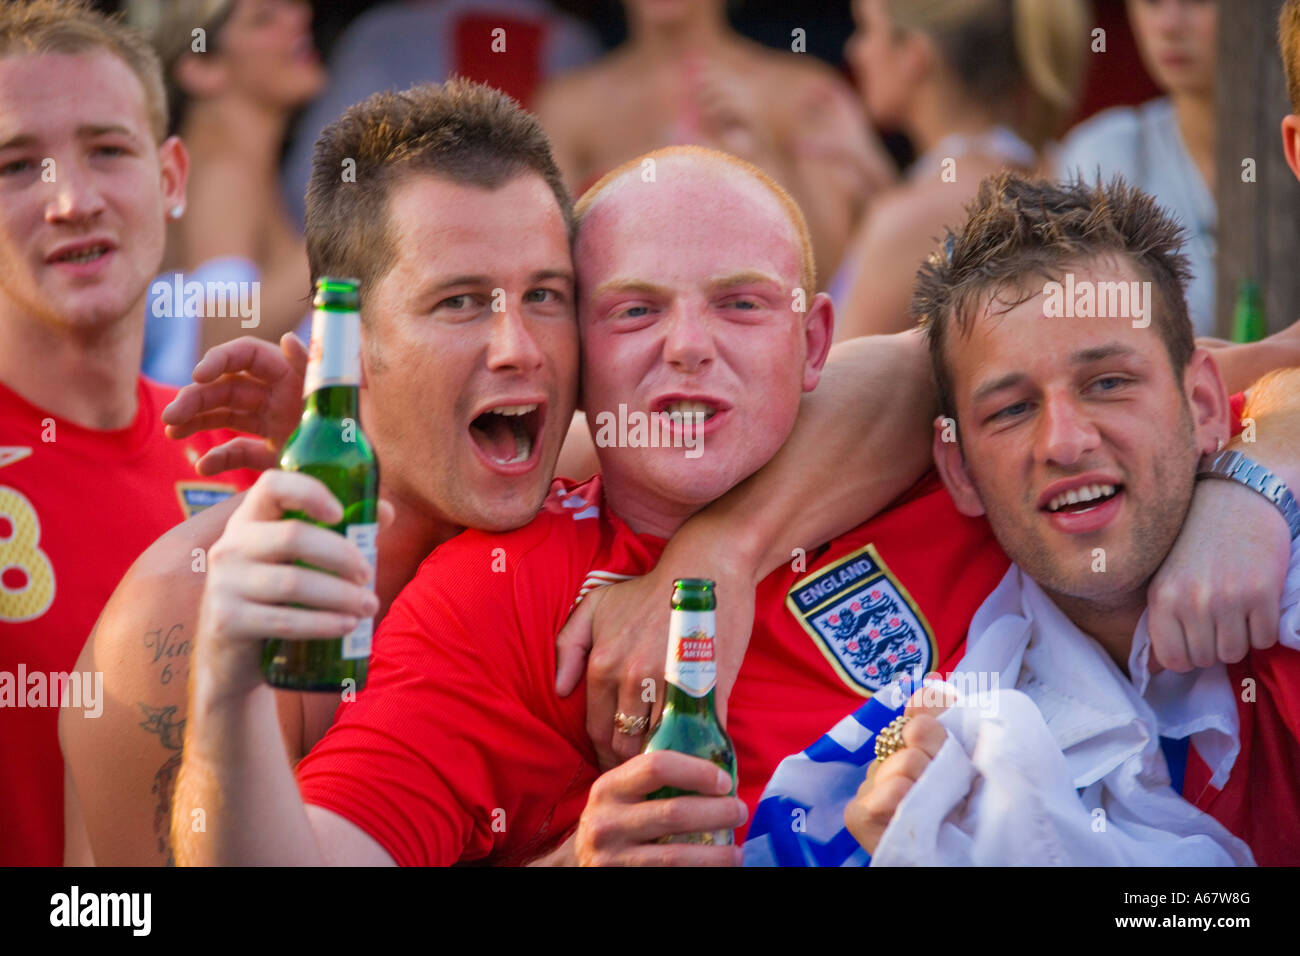 Three young men English fans in Kavos Corfu after England on 25 June 2006 in the World Cup JMH2705 Photo - Alamy